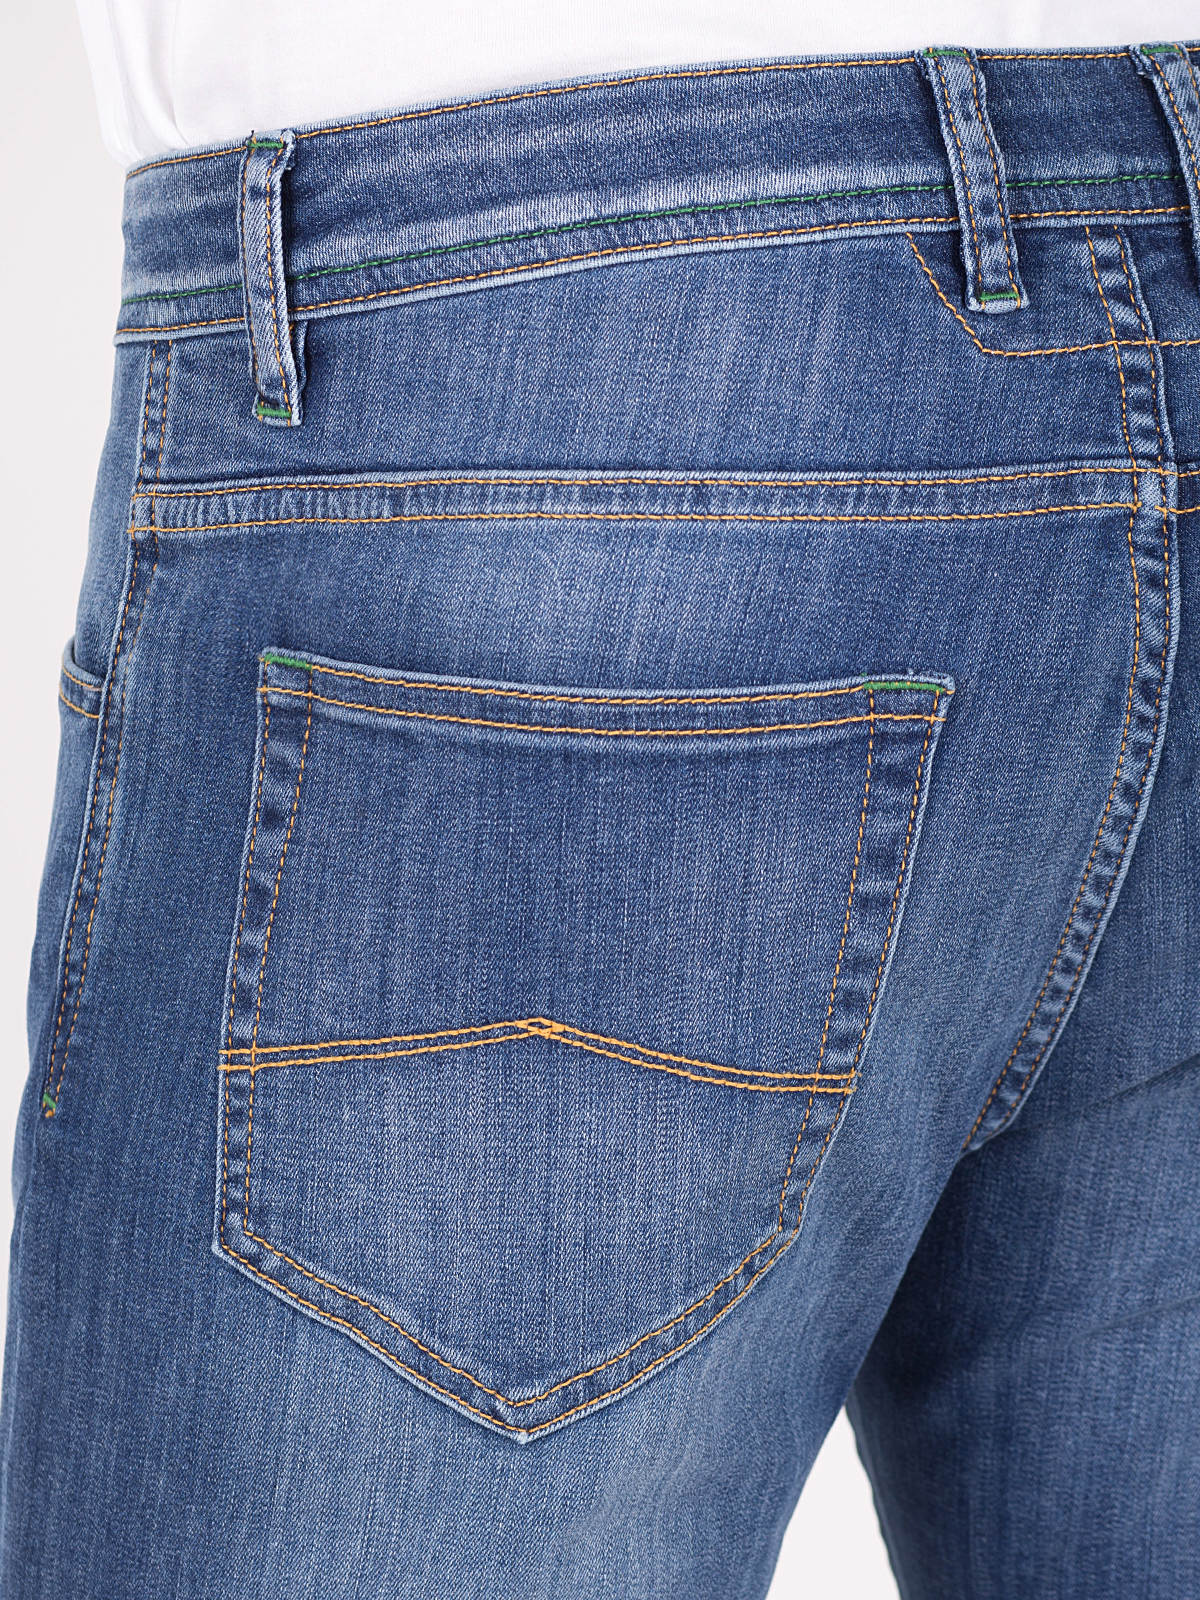 Jeans in medium blue with trit effect - 62133 € 27.56 img4